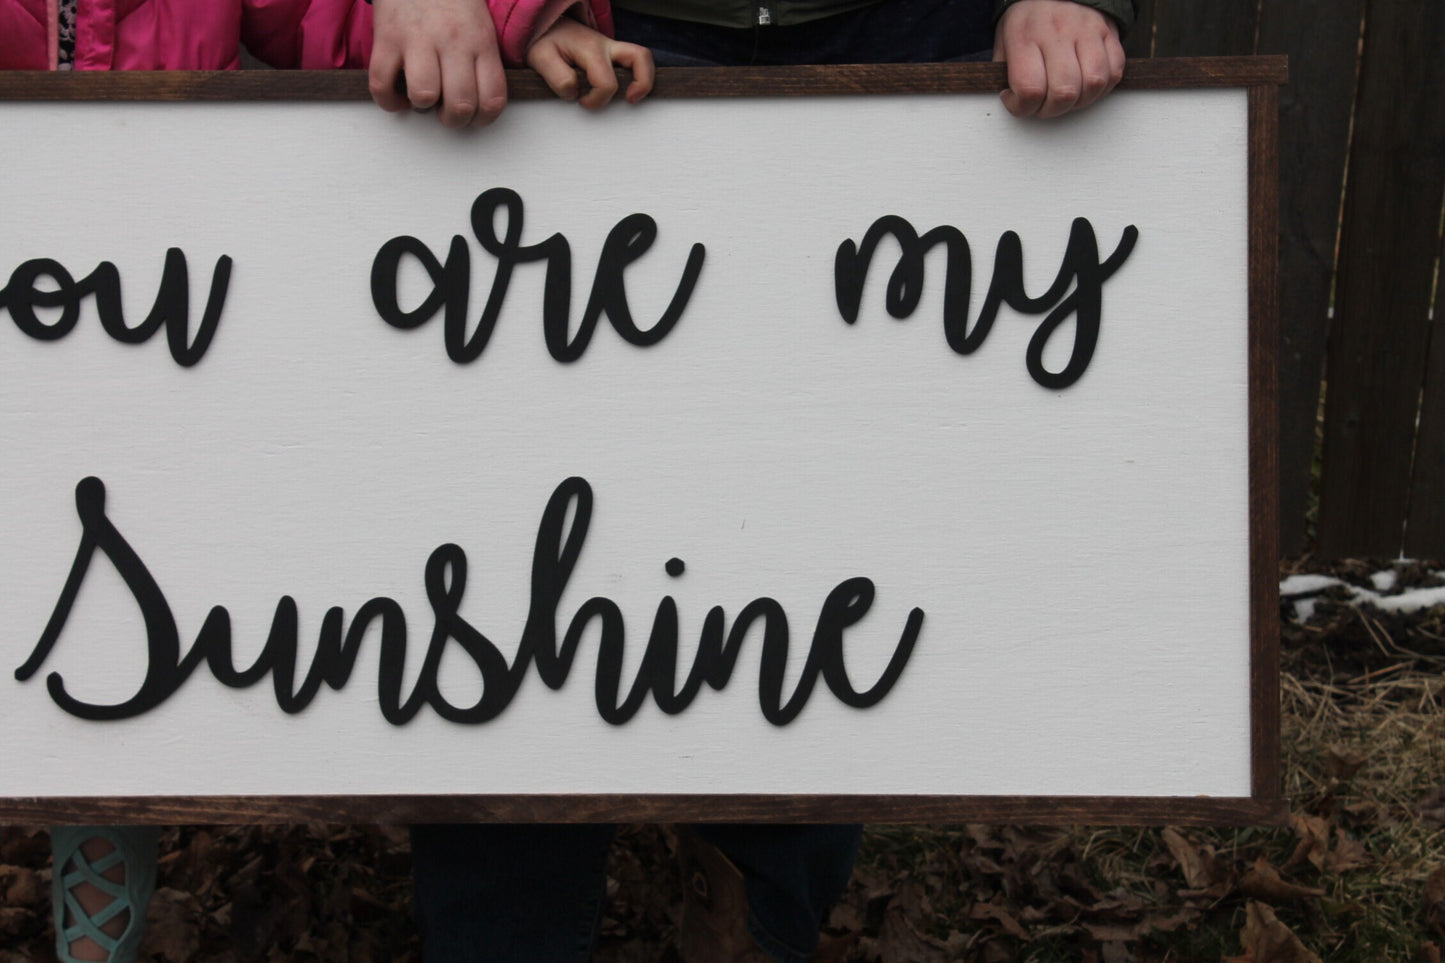 You are my Sunshine, Sunshine, Extra Large 3D Sign, Wood Sign, Large Wood Sign, Over Sized, Raised Text, Sign, Shabby Chic, Rustic, 3D